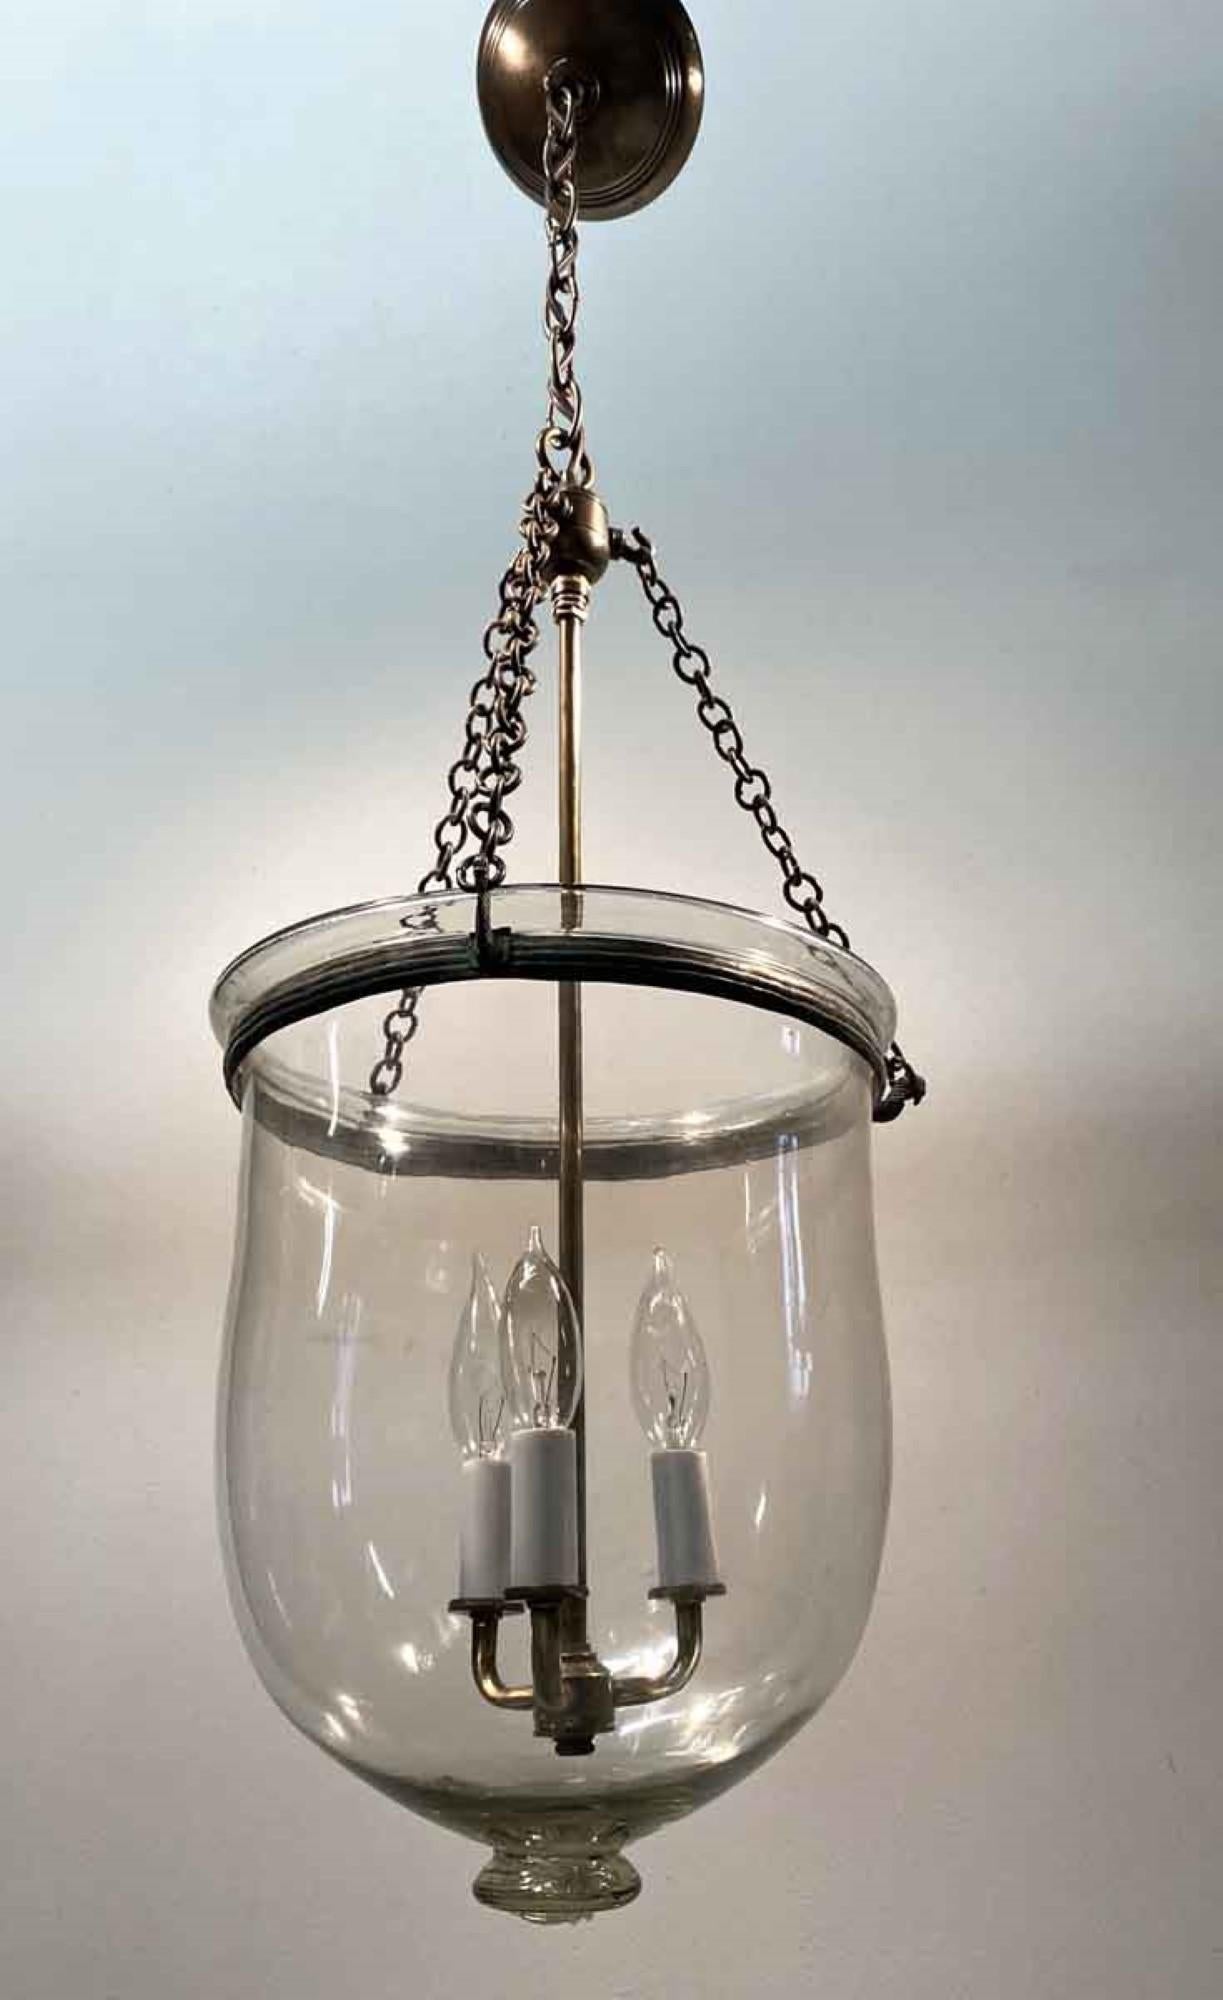 Late 19th Century 1890s English Clear Bell Jar Pendant Lantern Now Electrified with Three Lights